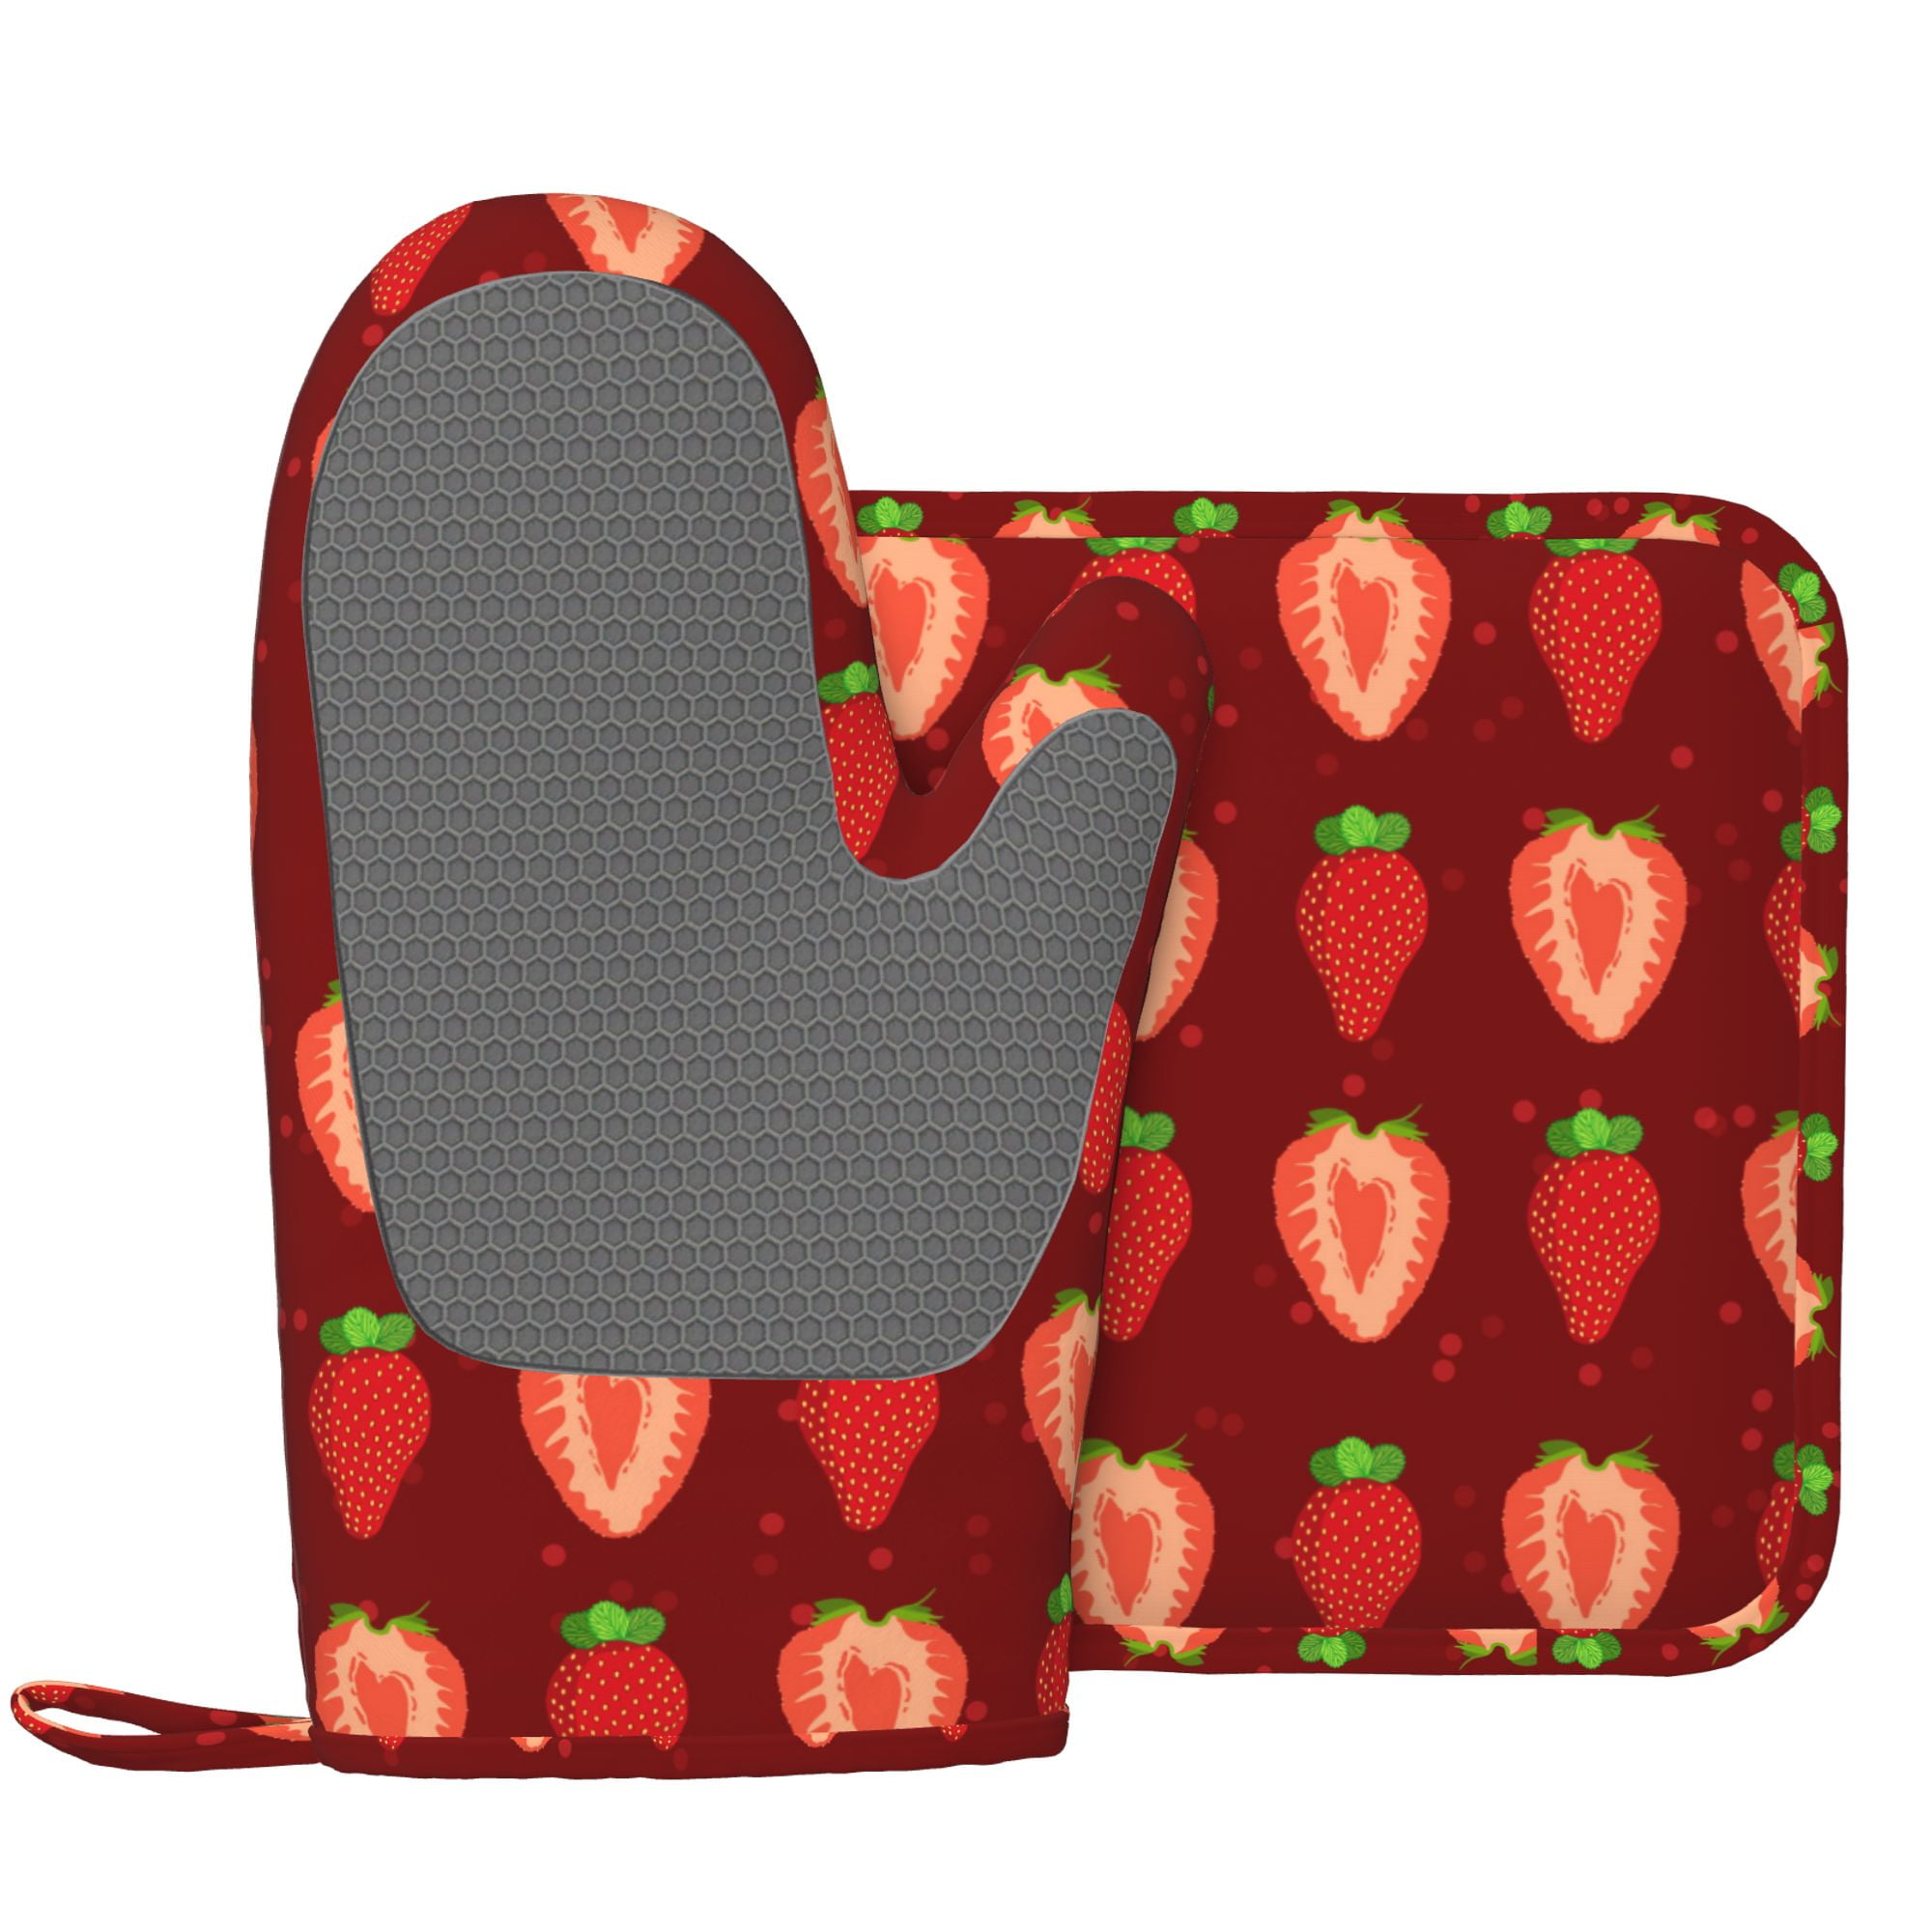 Birds & Spots Oven Mitts/pot Holders Set of 2 Round Oven Gloves 